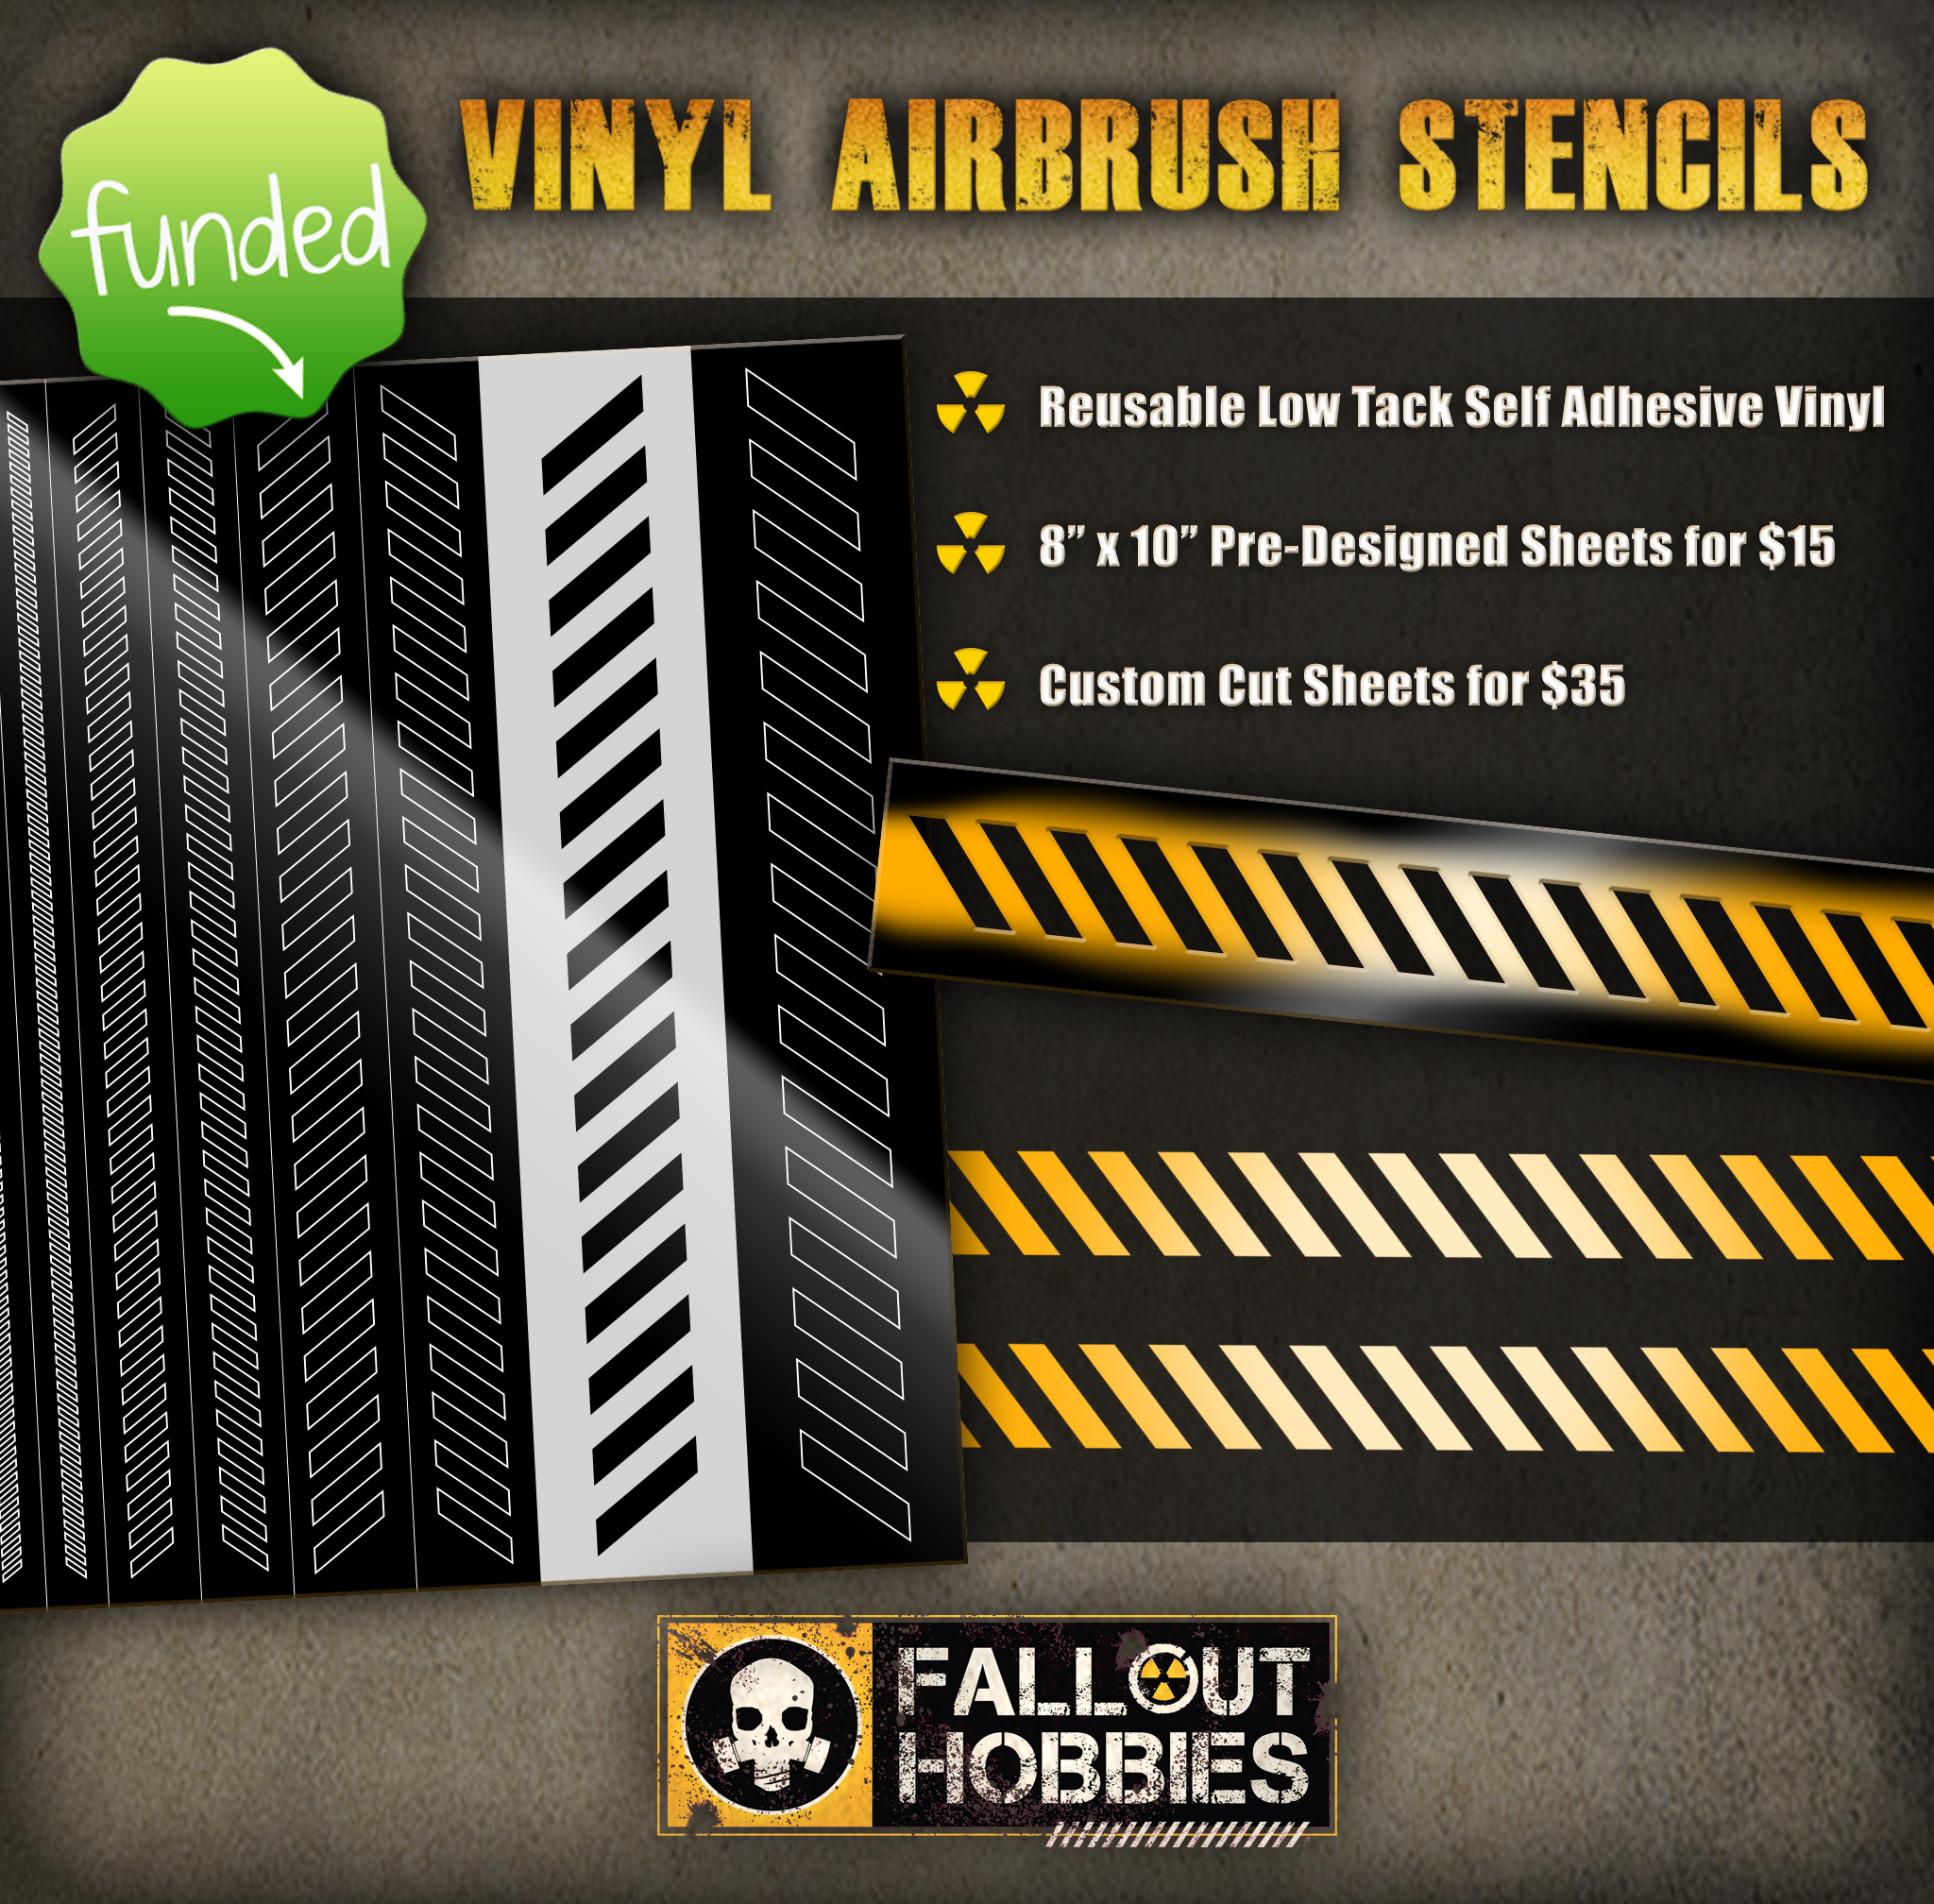 Fallout Hobbies Fully funded and expanding into vinyl stencils